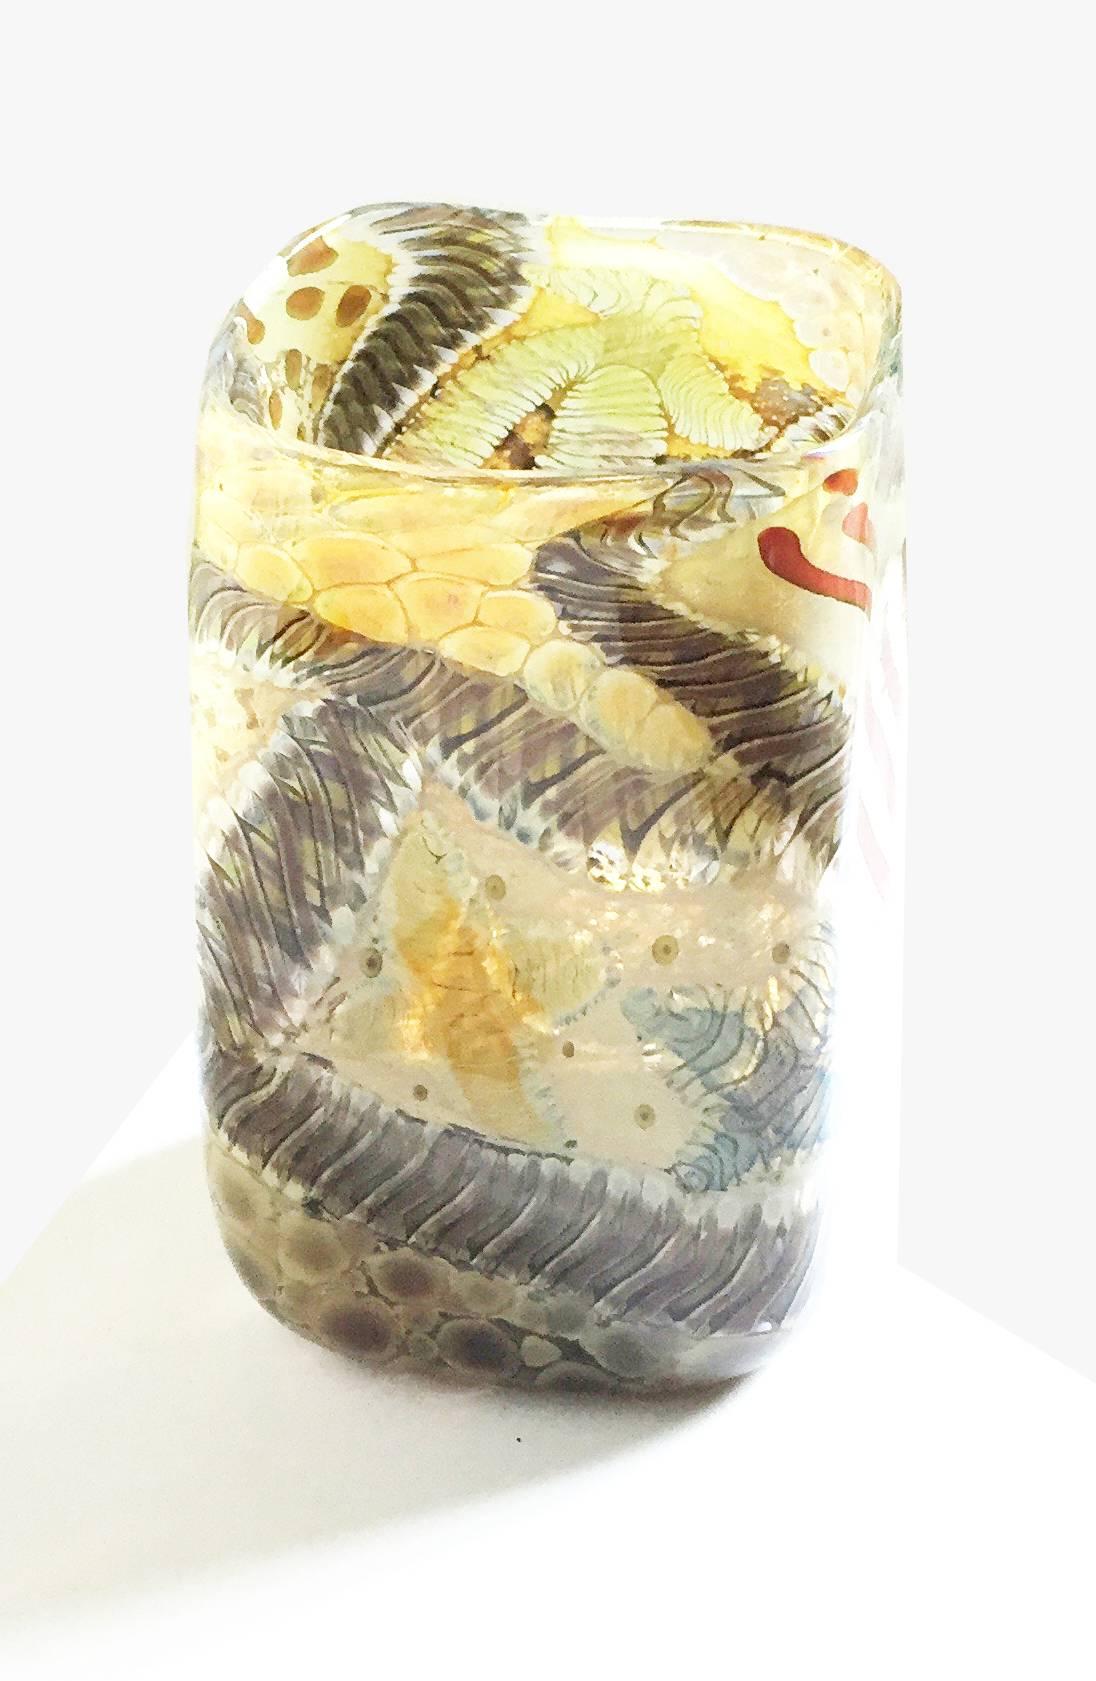 Contemporary Studio Glass vase by Kenny Walton the rectangular vase enamelled with white, red, green, yellow, ochre and blue elements that wind around like troglodytes and other ancient life forms.

American glassblower Kenny Walton (? - 2010) was